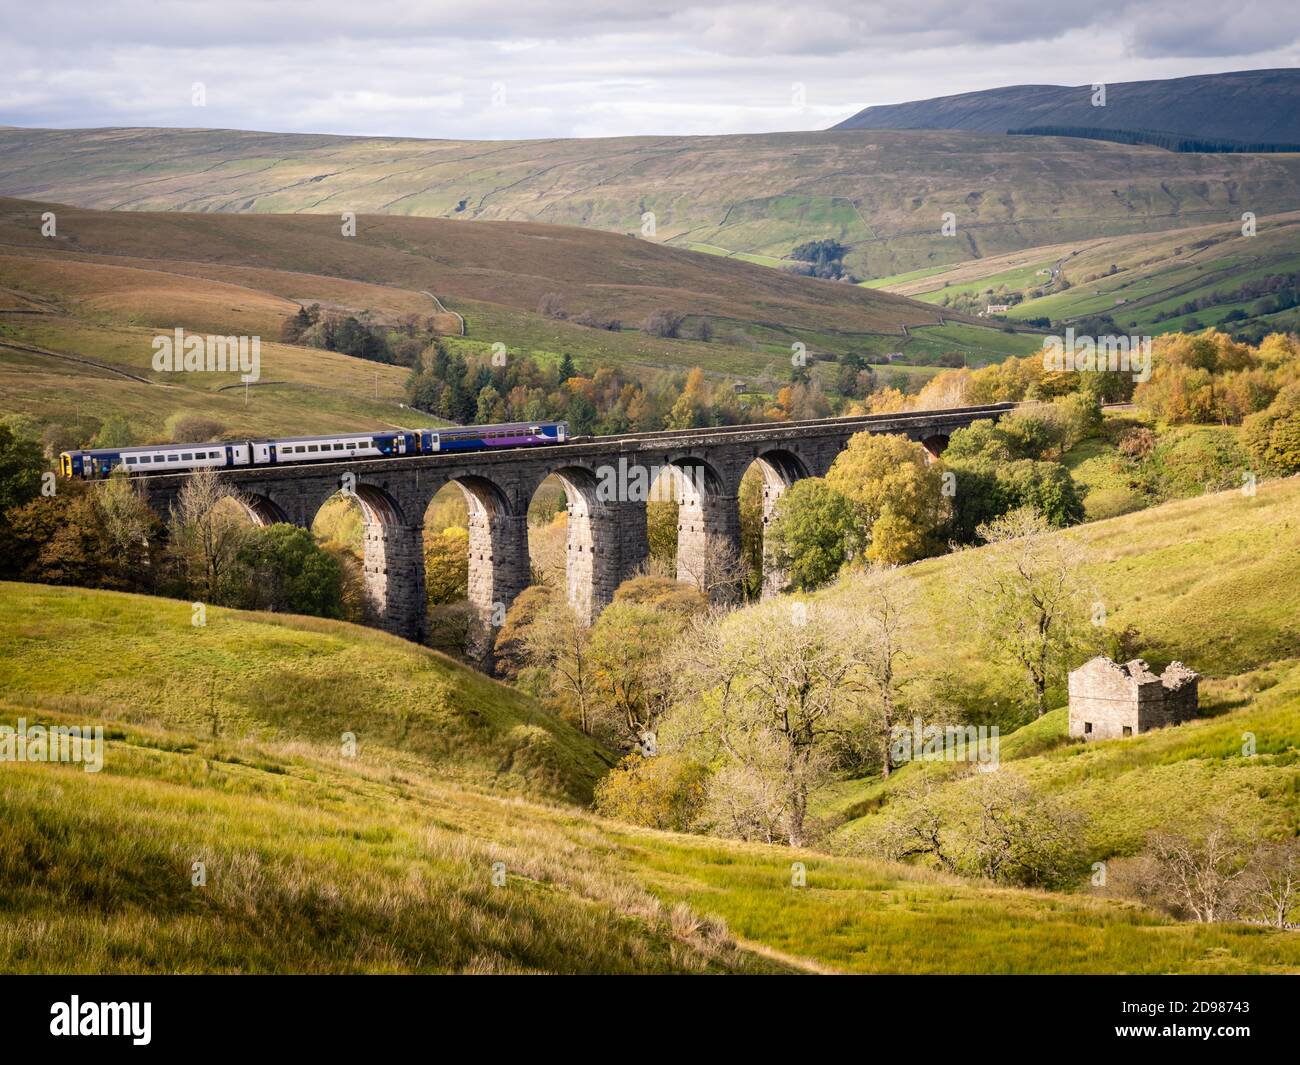 08.10.2020 Dent, Cumbria, UK. Dent Head Viaduct is the next viaduct on the Settle-Carlisle Railway after Ribblehead Viaduct, going towards Carlisle. T Stock Photo